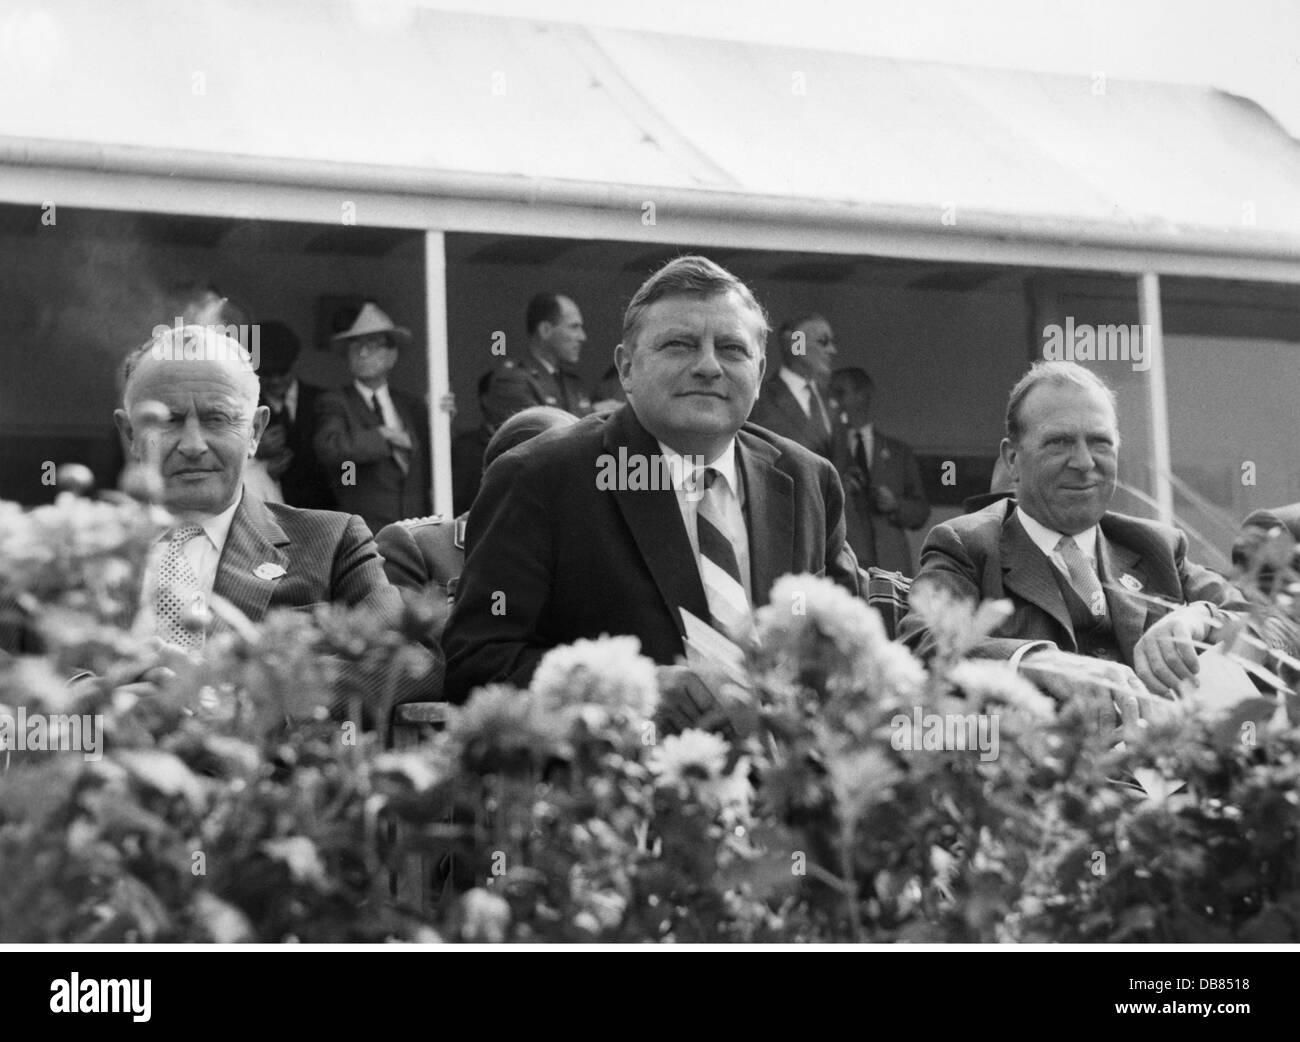 Strauss, Franz Josef, 6.9.1915 - 3.10.1988, German politician (CSU), Federal Minister of Defence 16.10.1956 - 9.1.1963, at the air show in Farnborough, 9.9.1960, Stock Photo